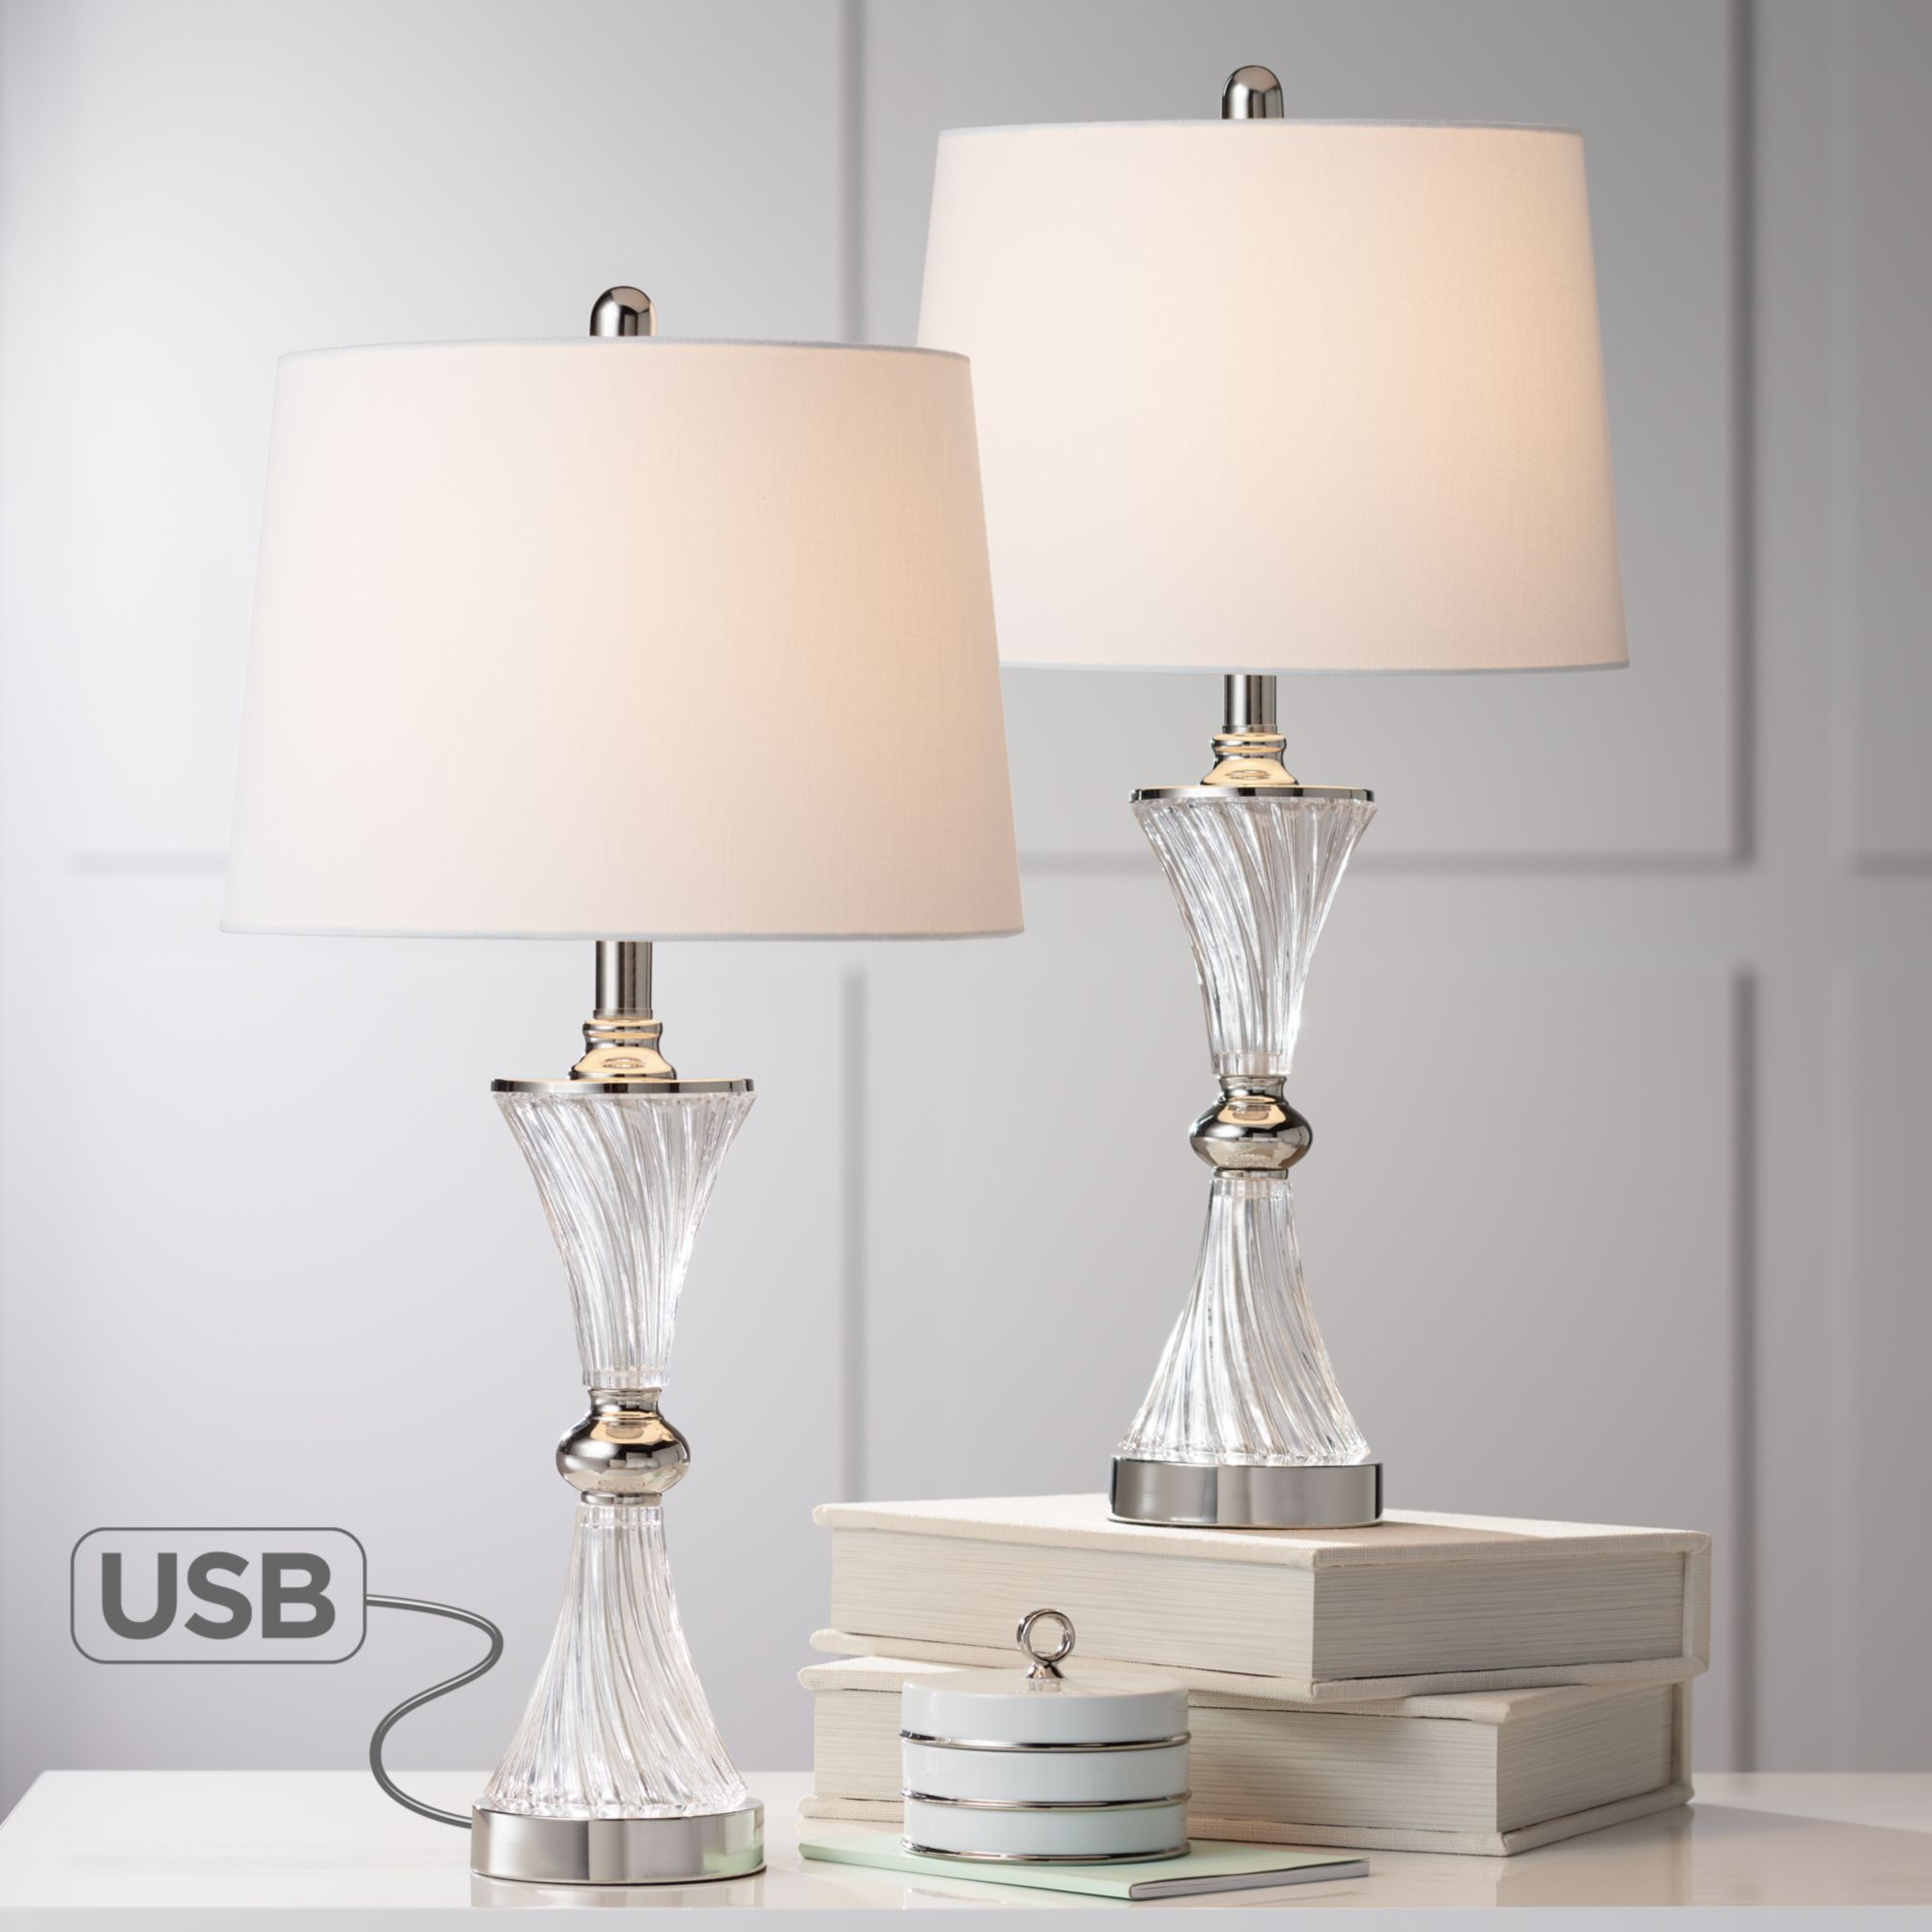 Regency Hill Modern Table Lamps Set Of 2 With Usb Charging Port Chrome And Glass Drum Shade For Living Room Family Bedroom Bedside inside proportions 2000 X 2000